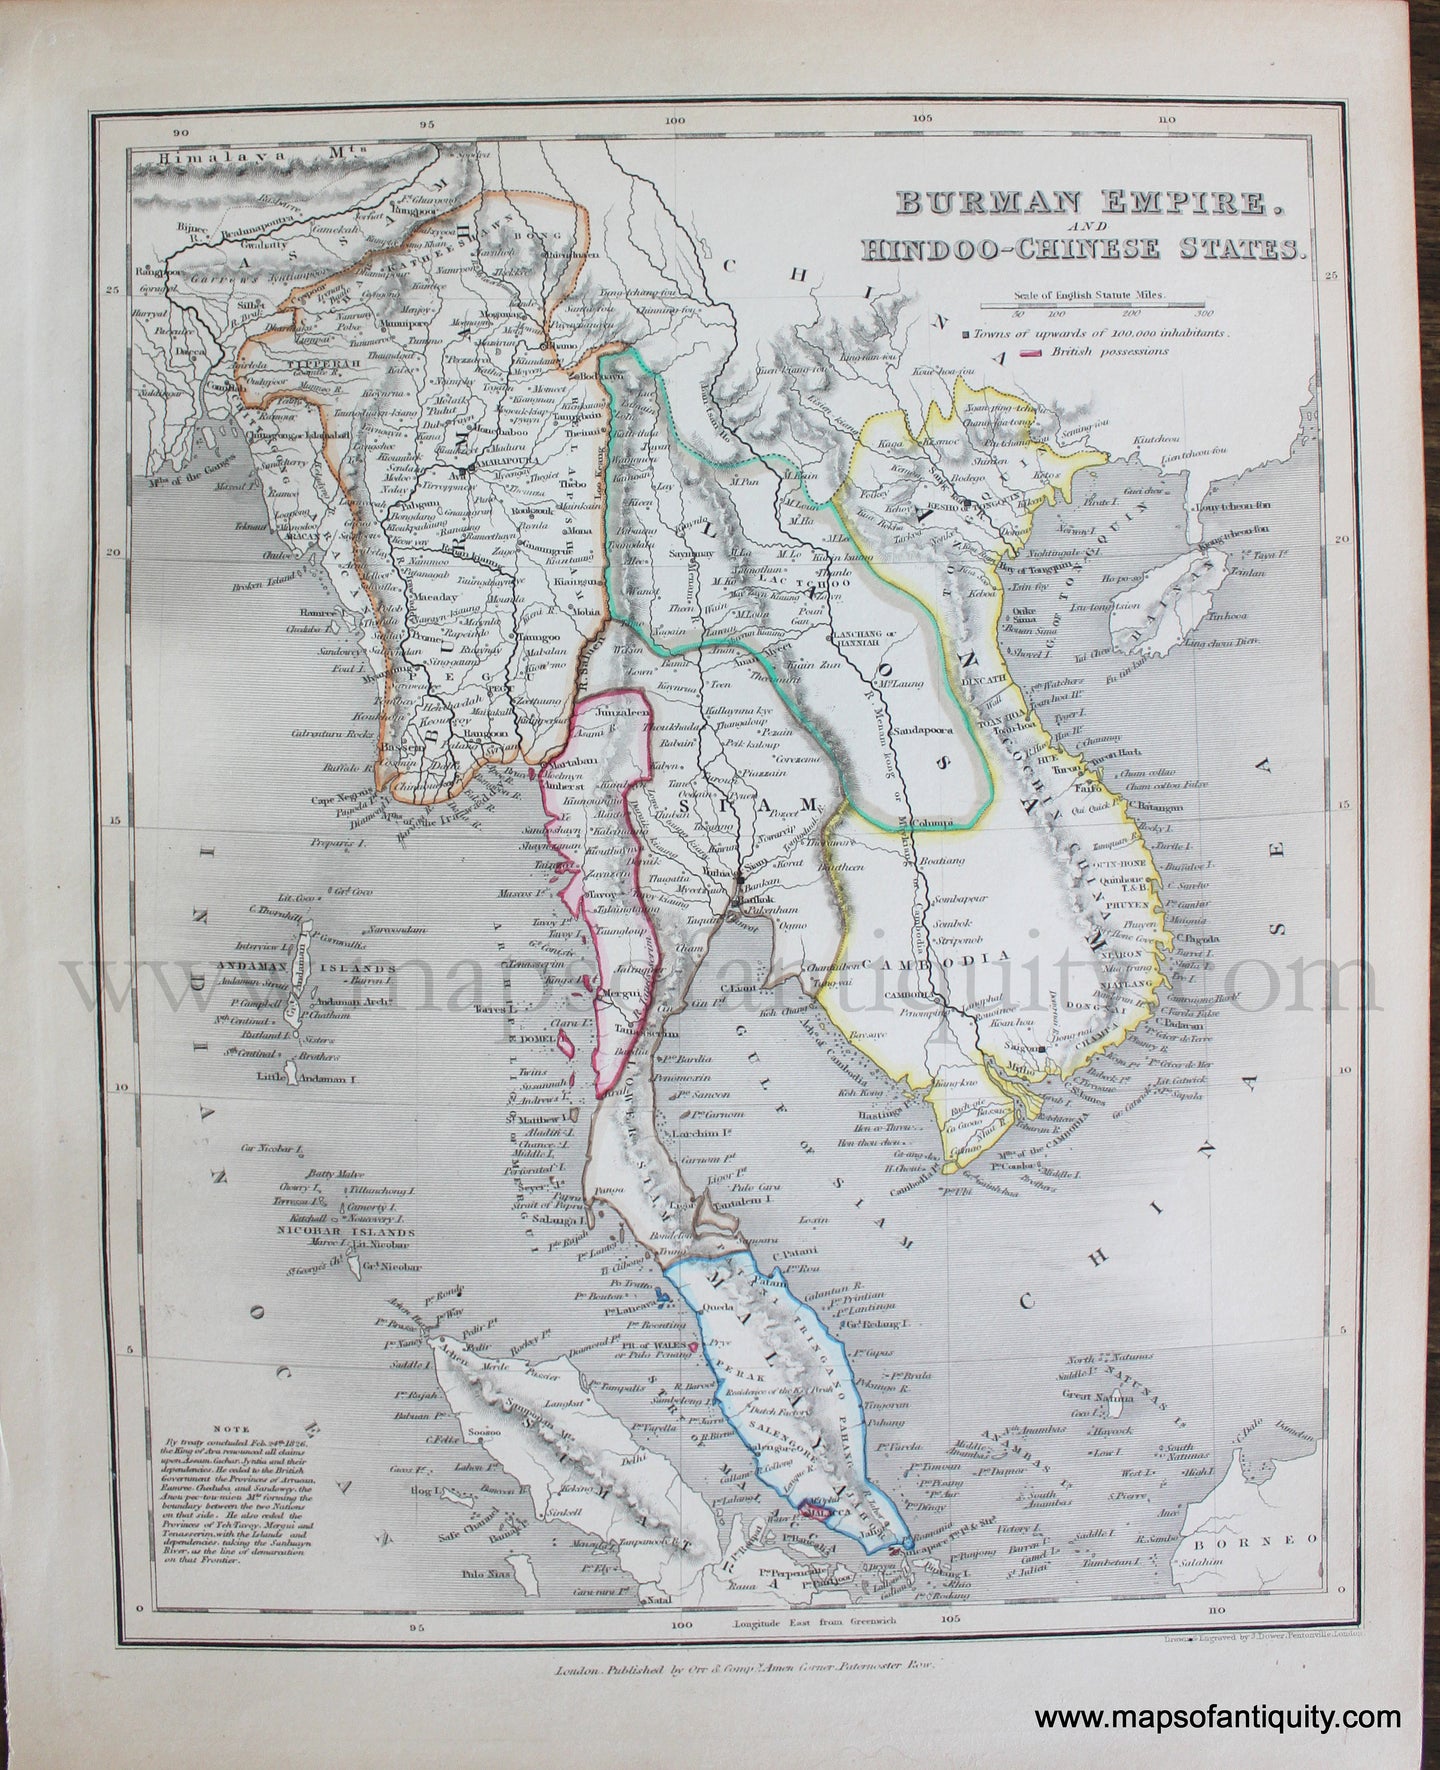 Genuine-Antique-Map-Burman-Empire-and-Hindoo-Chinese-States-Asia--1850-Petermann-/-Orr-/-Dower-Maps-Of-Antiquity-1800s-19th-century